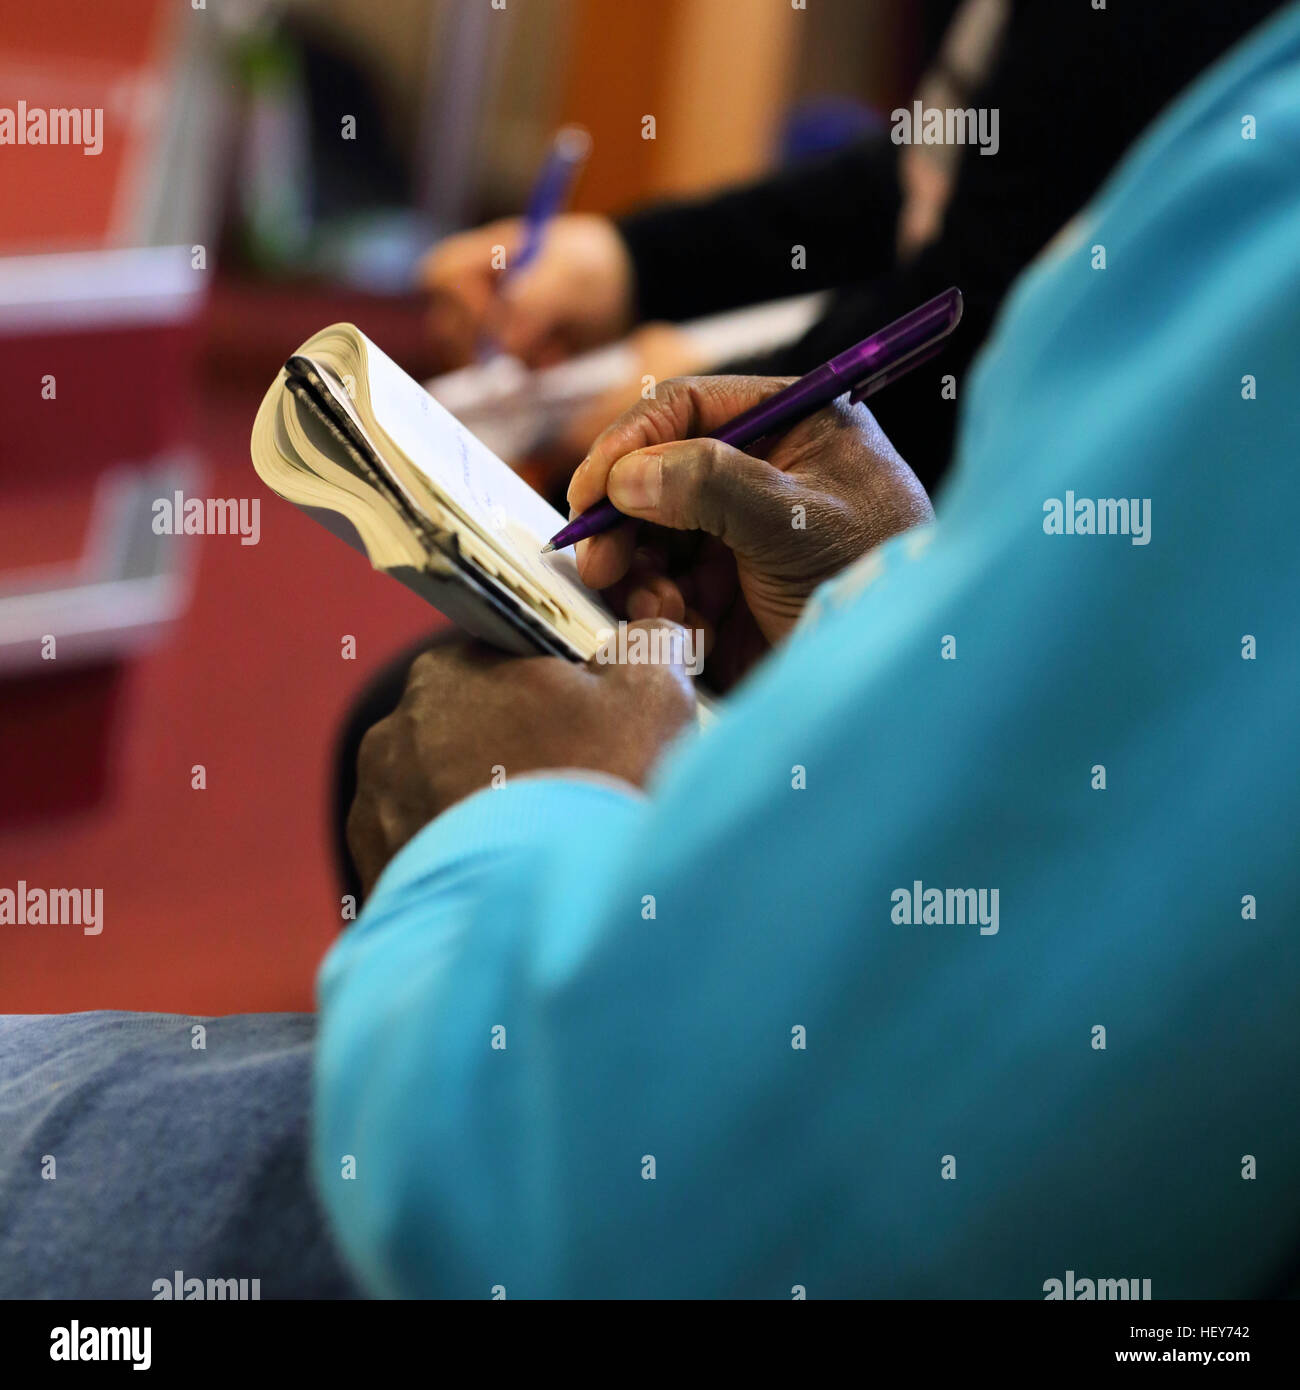 Close-up of a person's hands writing in a notepad during a talk or seminar Stock Photo